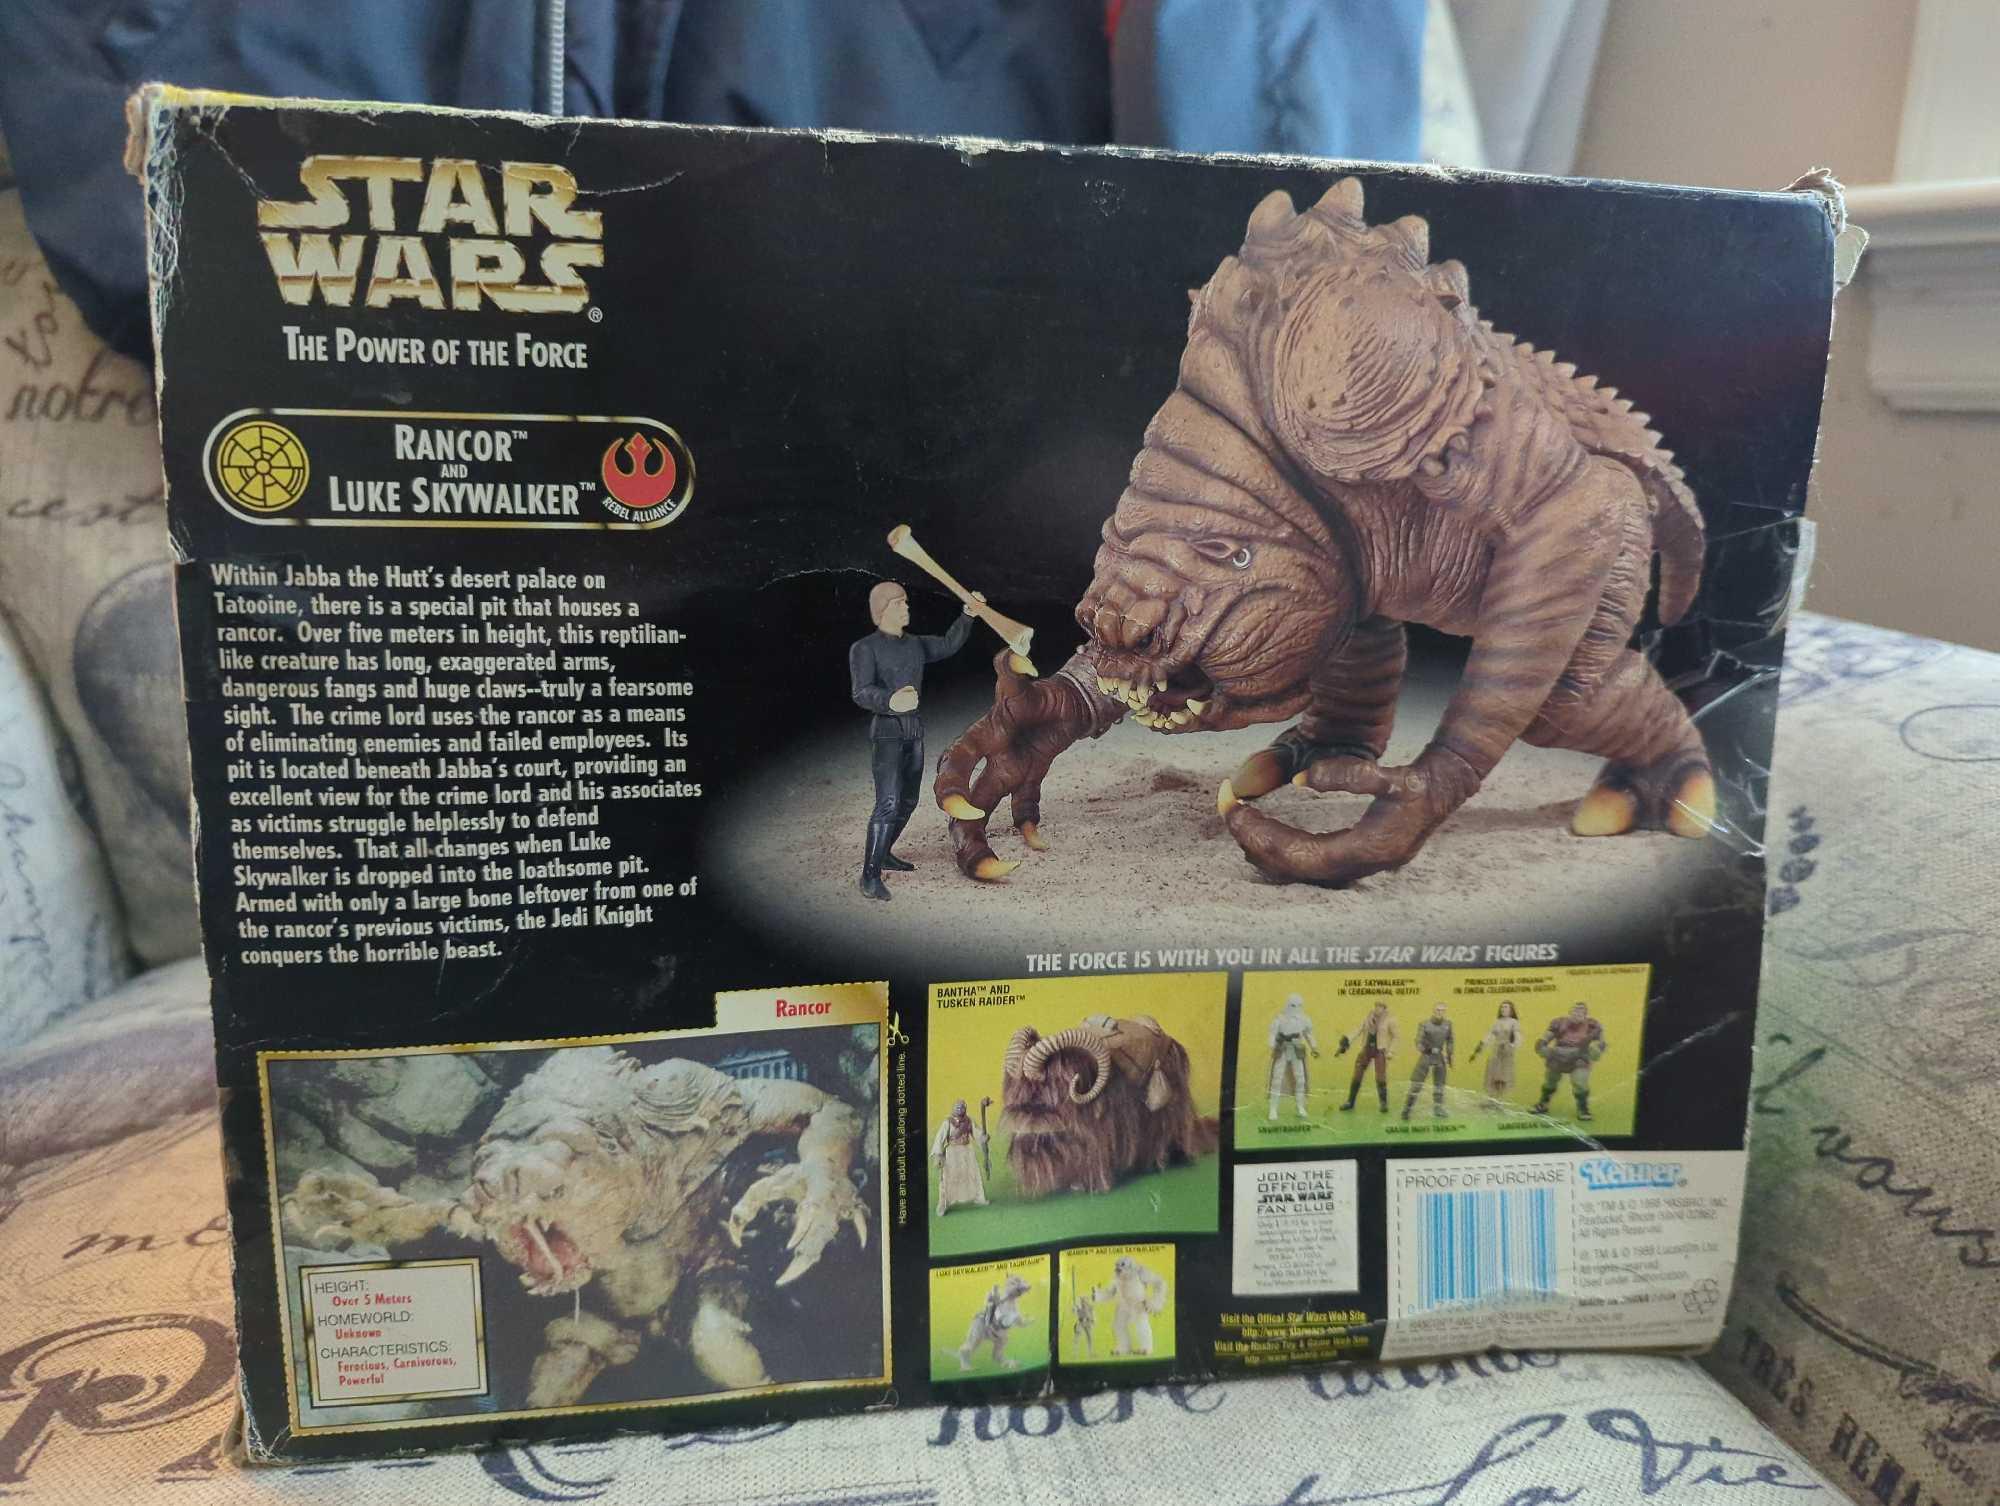 (LR)KENNER STAR WARS POWER OF THE FORCE, RANCOR AND LUKE SKYWALKER, BOX IS IN BAD CONDITION, FIGURES